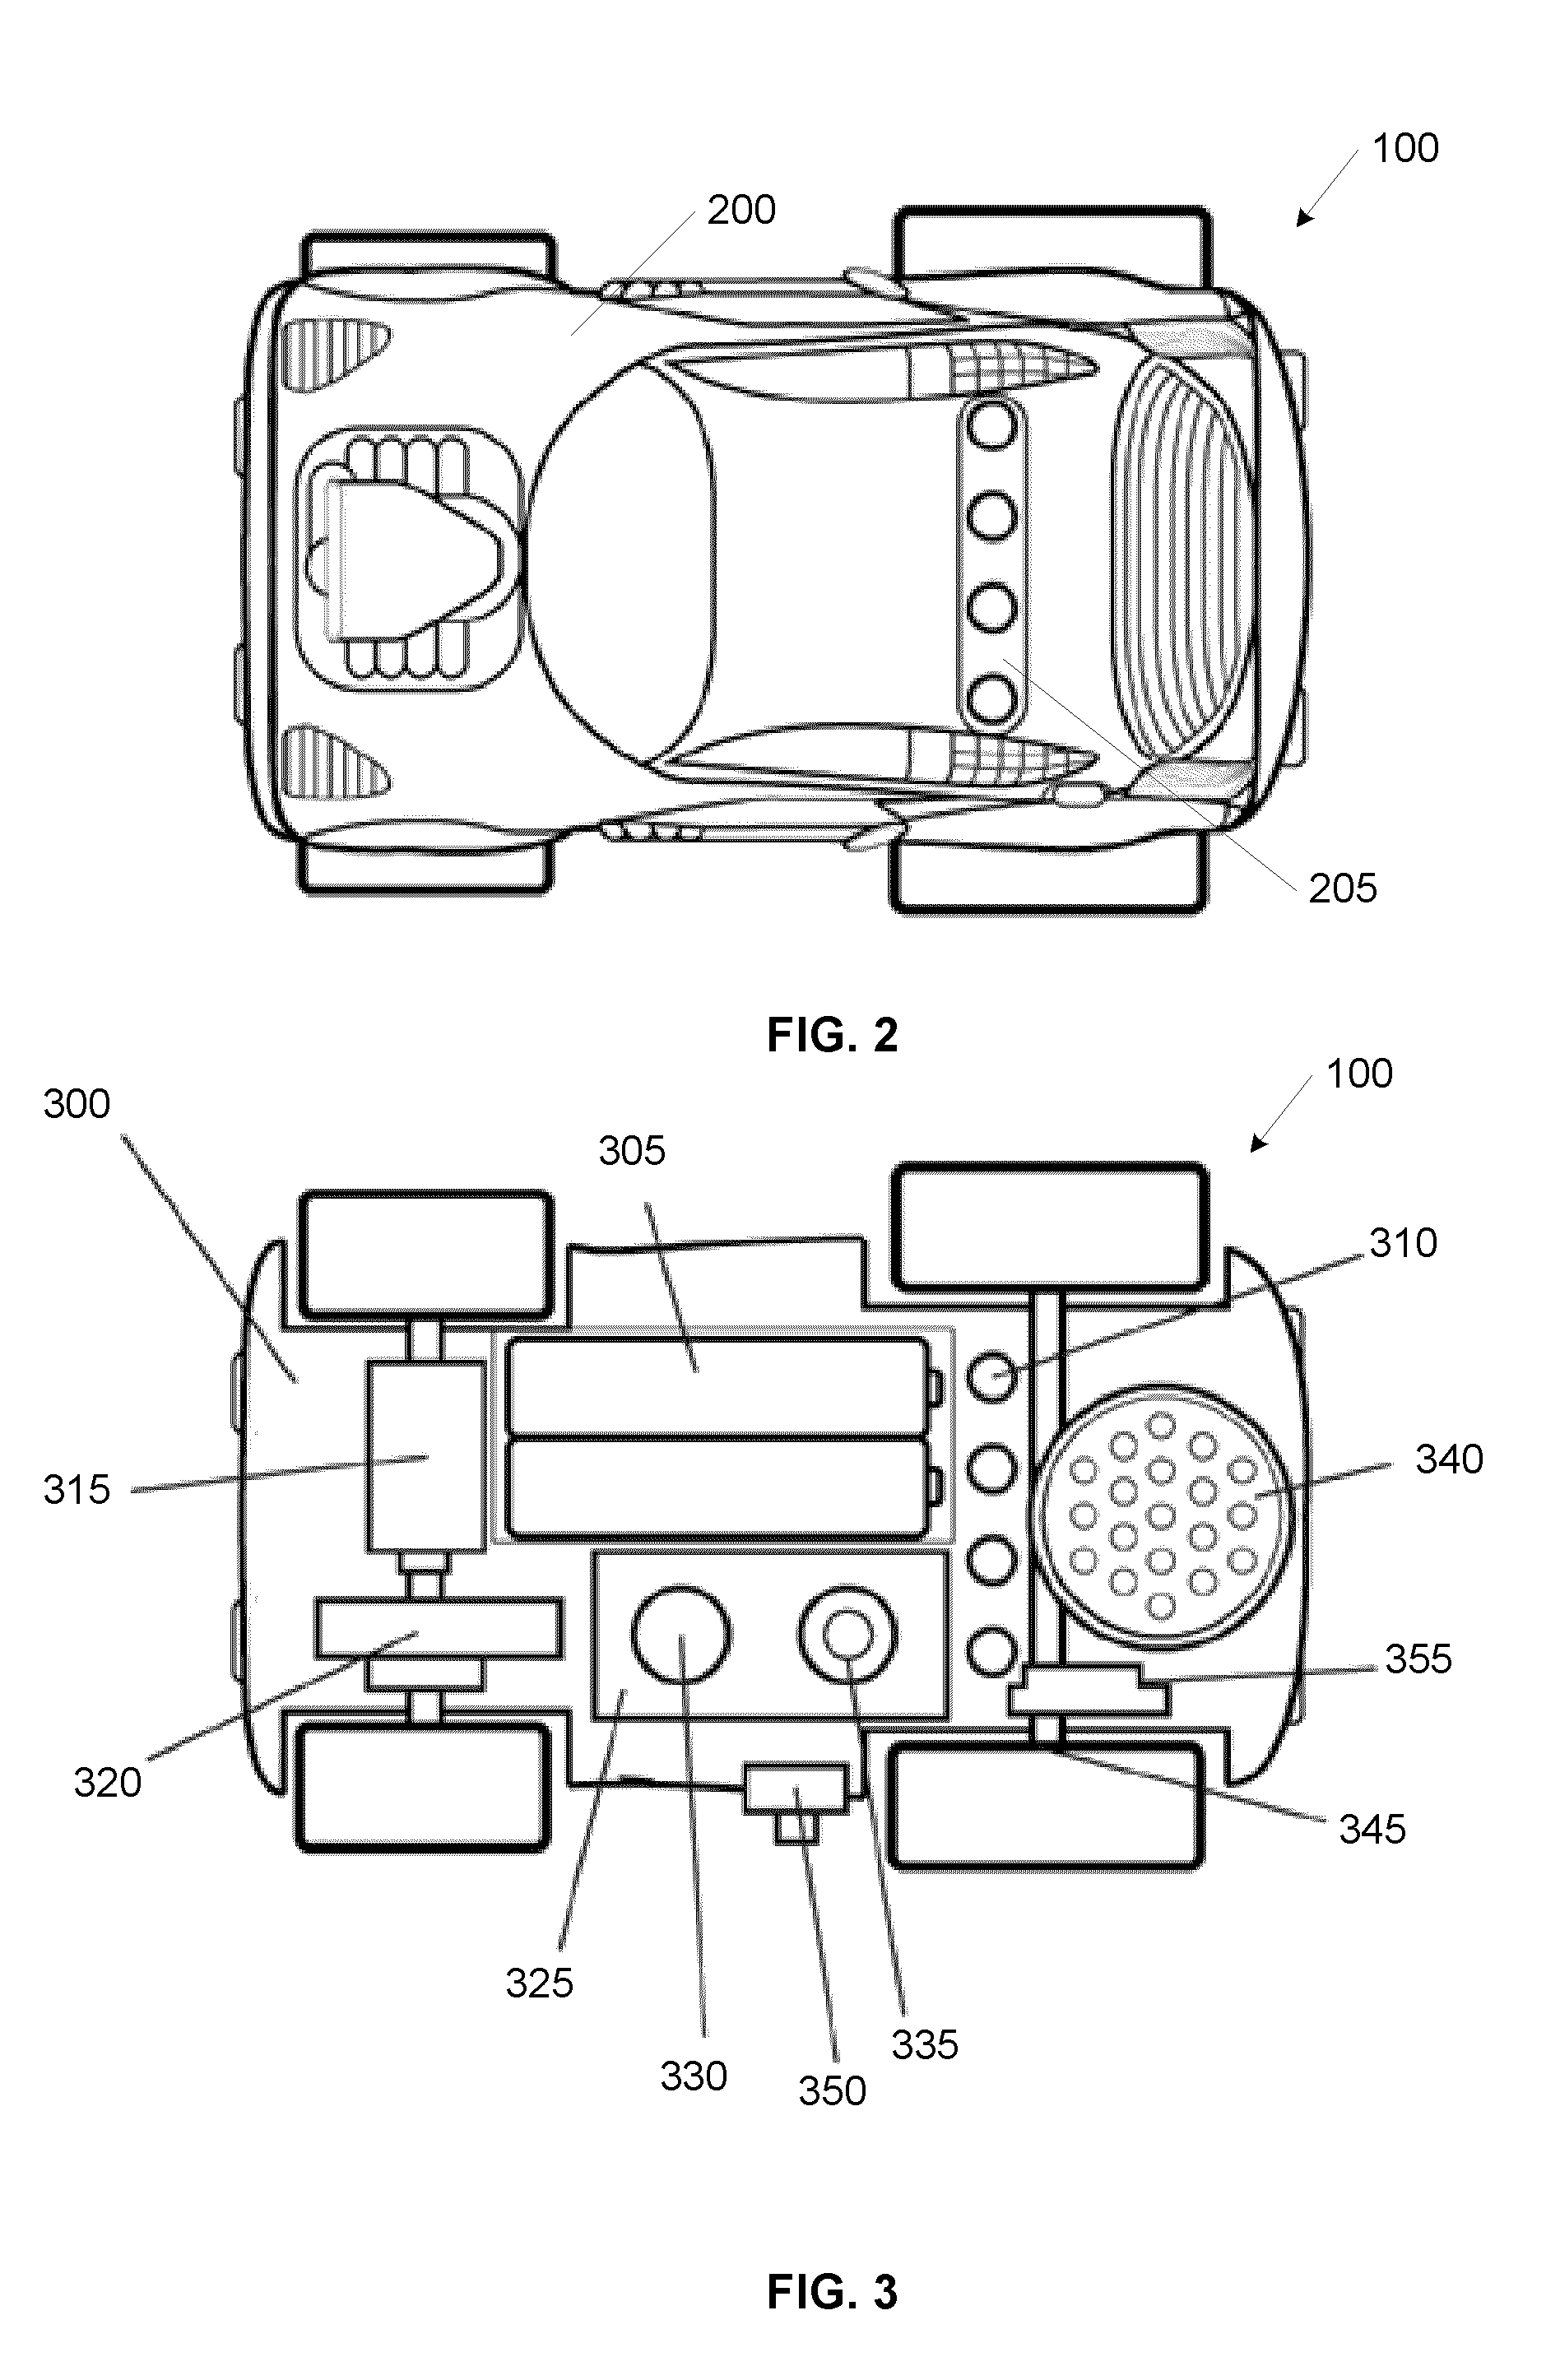 Apparatus, method, and computer program product for toy vehicle